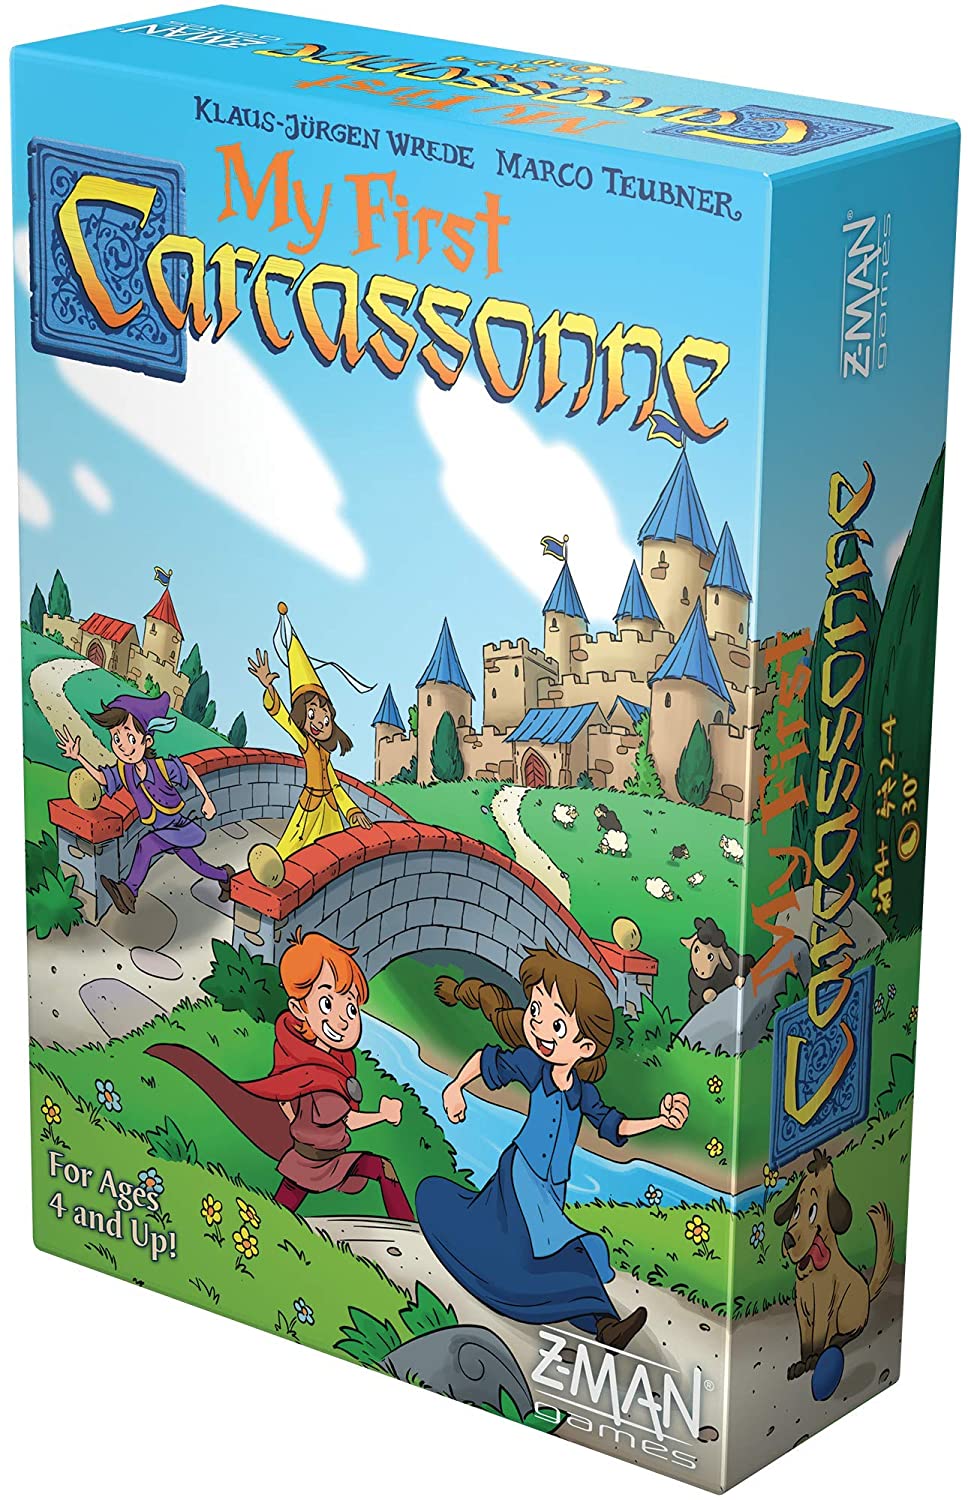 MY FIRST CARCASSONNE